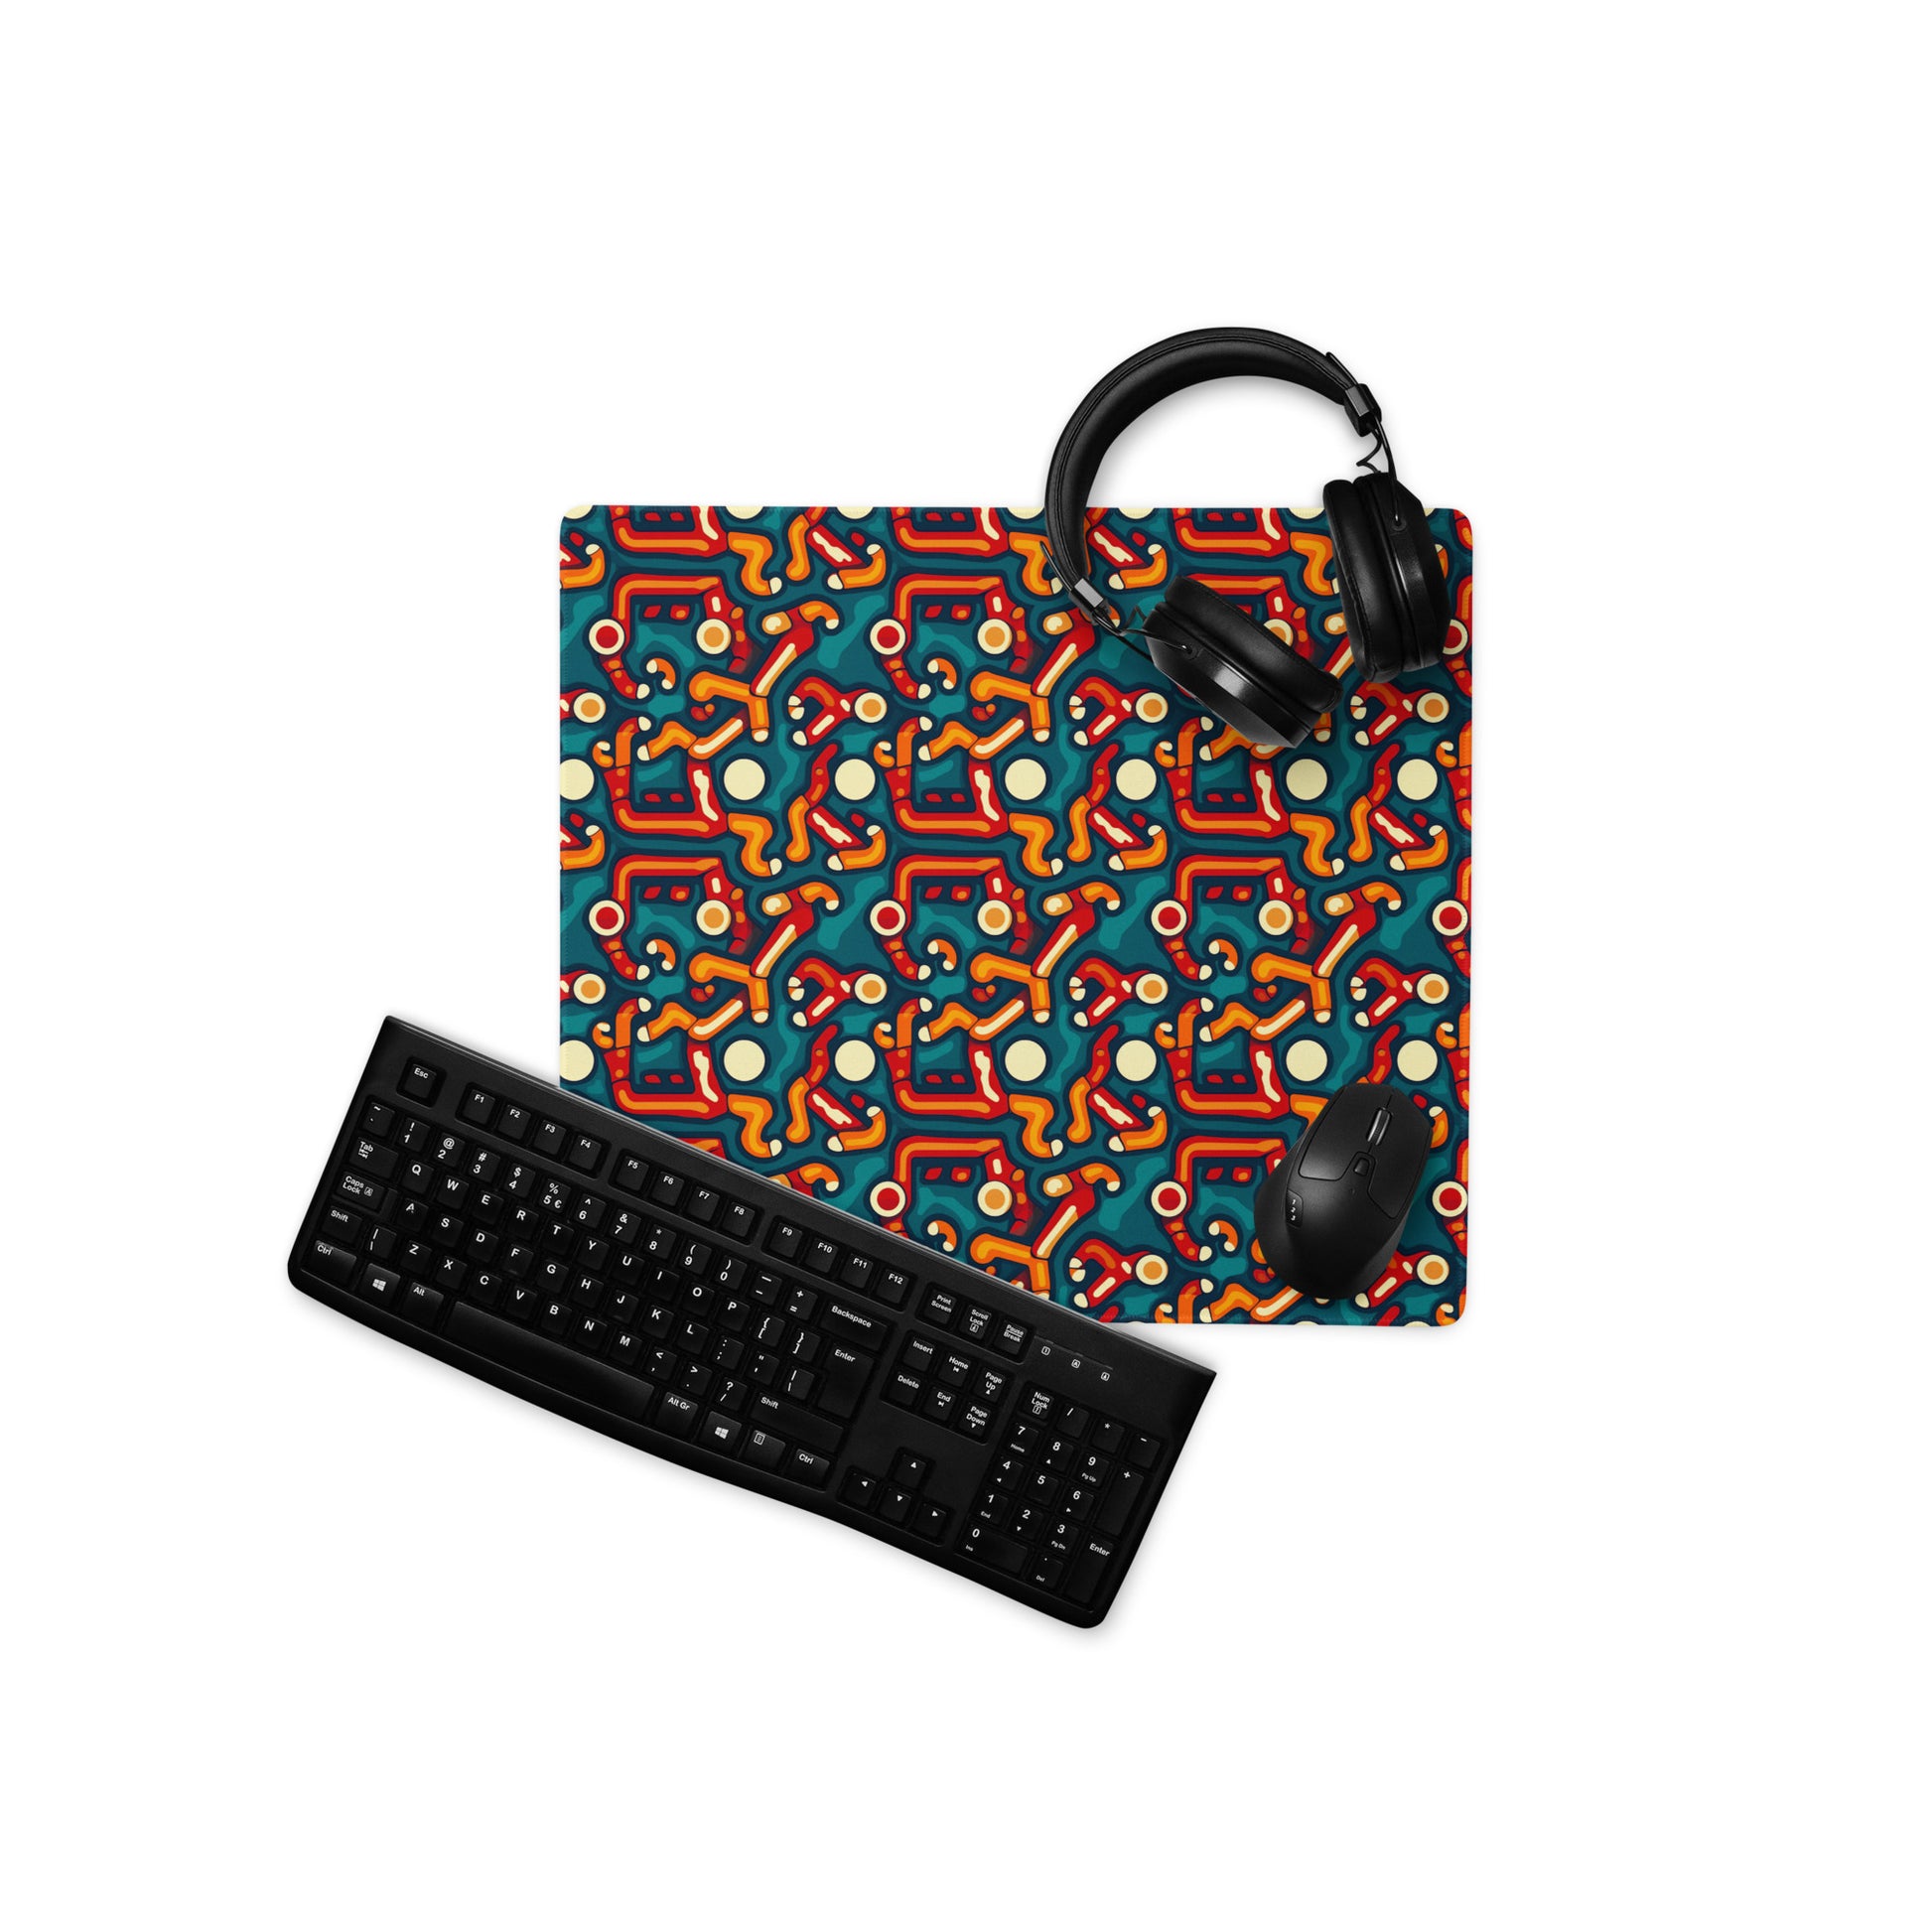 A 18" x 16" desk pad with abstract line art on it displayed with a keyboard, headphones and a mouse. Red, Orange and Teal in color.